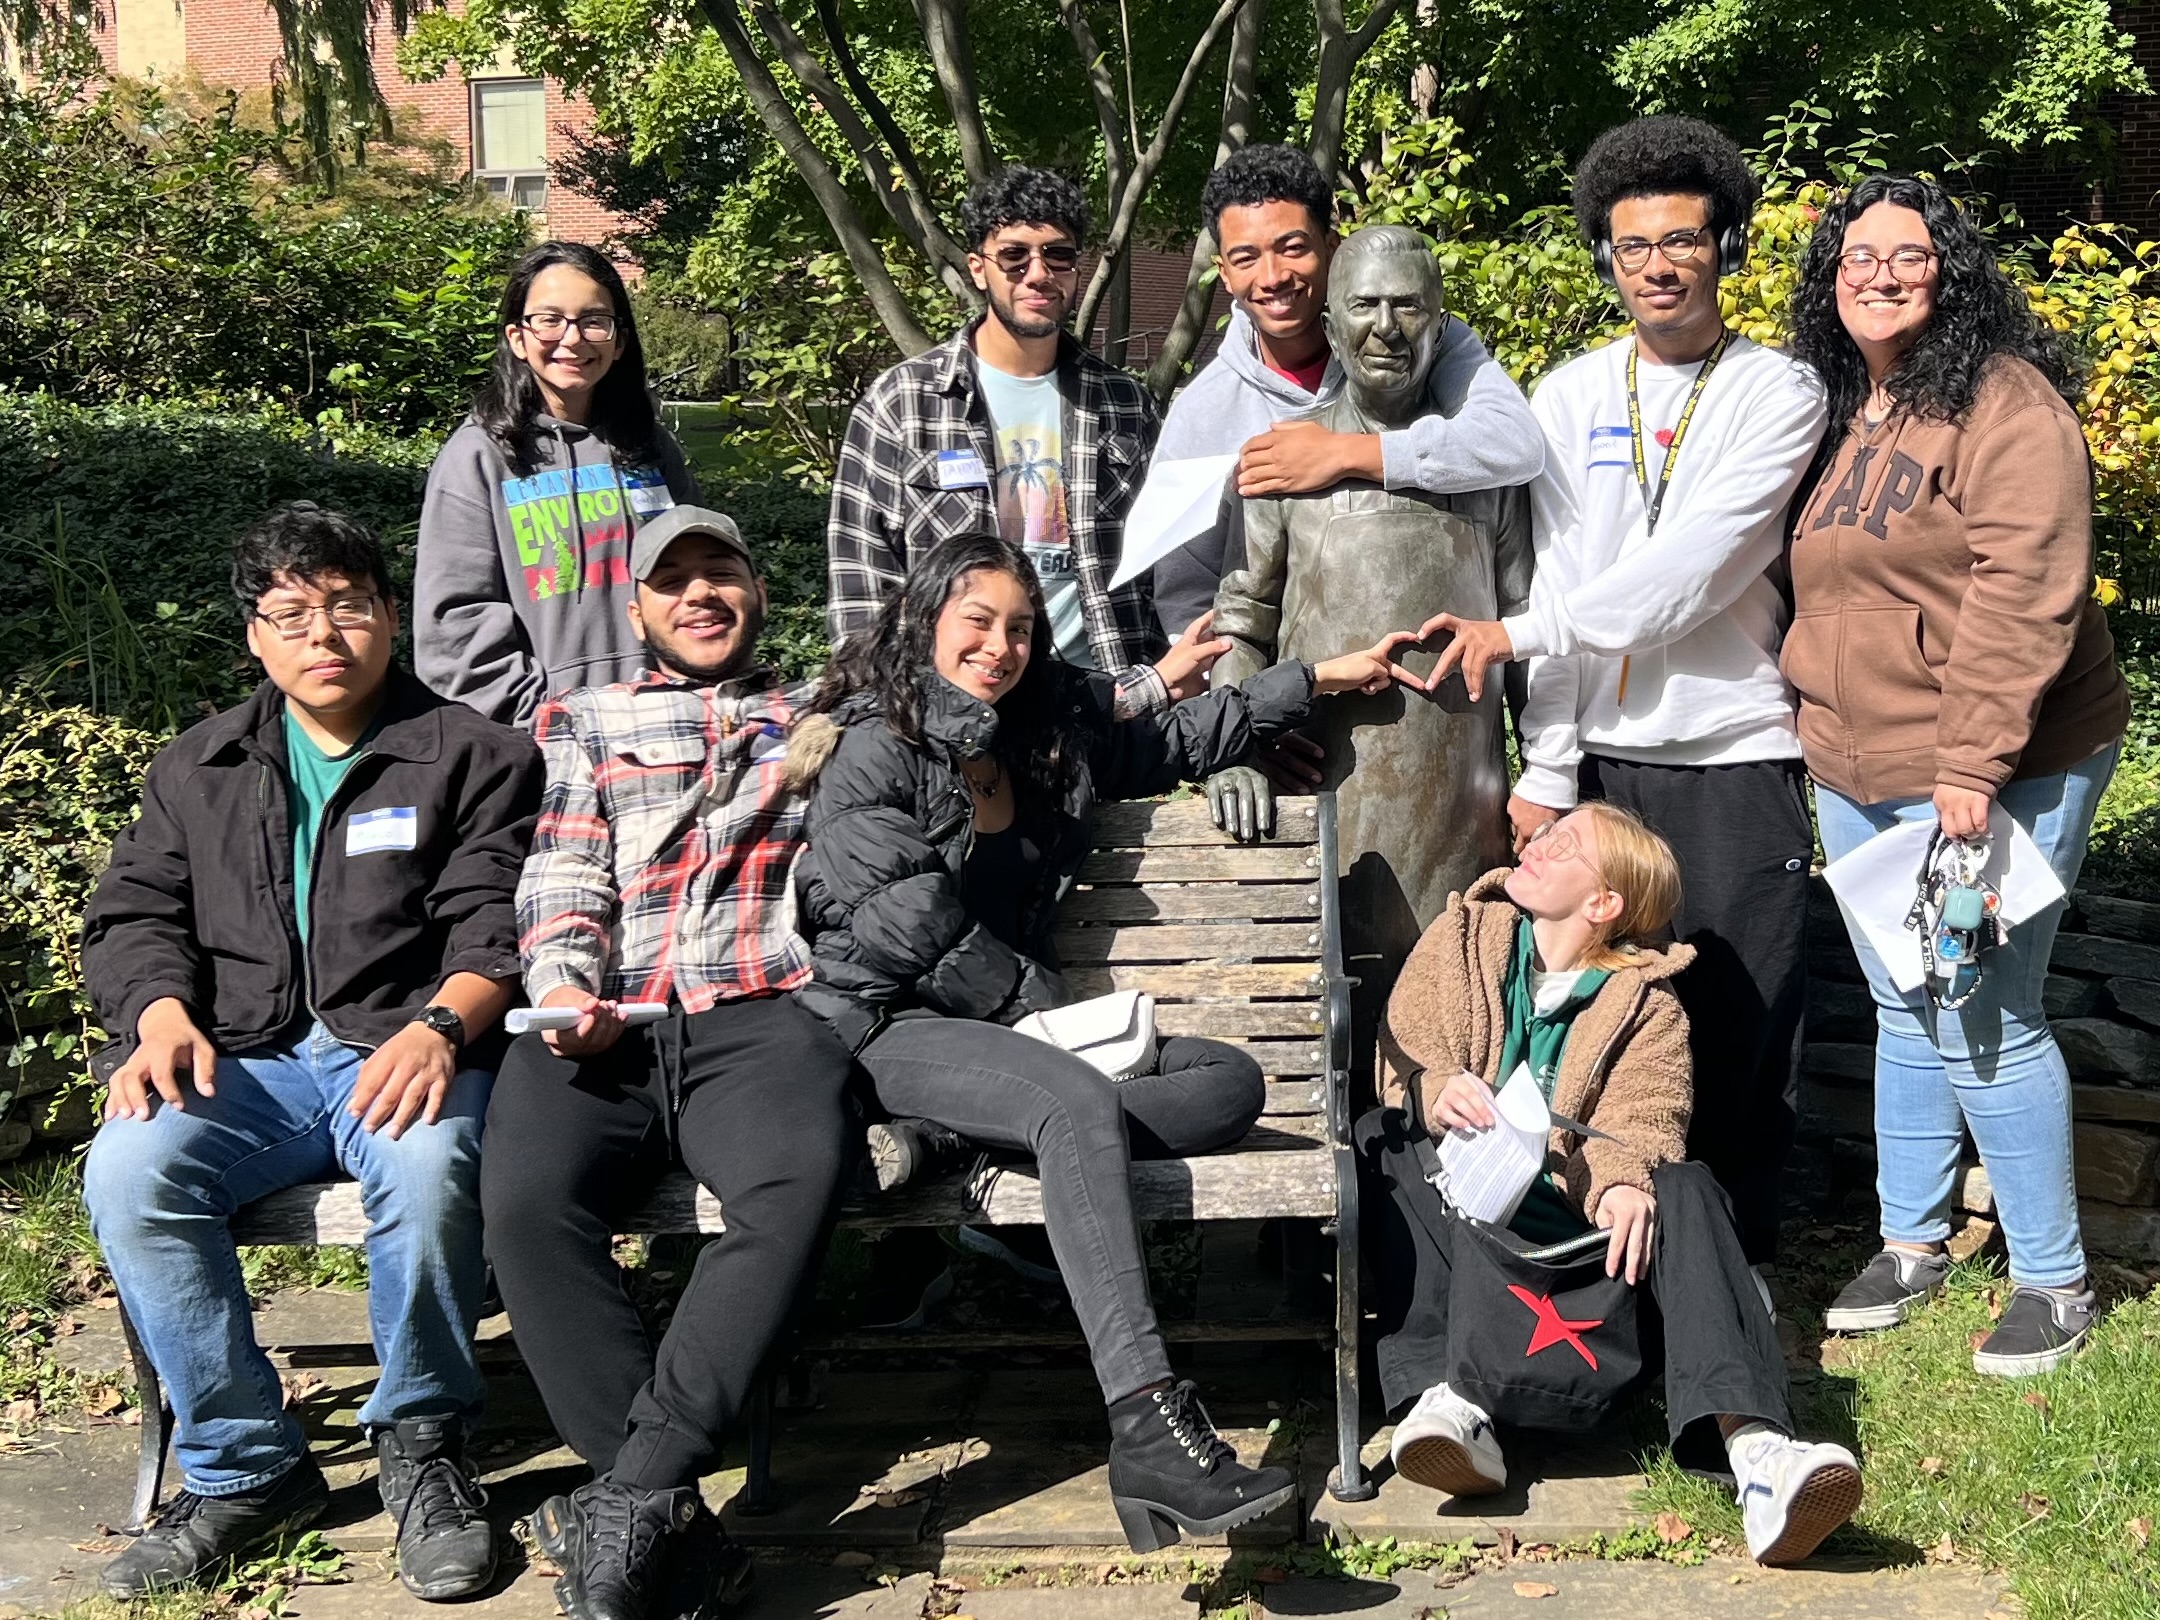 LVEP student group poses with Hot Dog Frank Statue in LVC Peace Garden